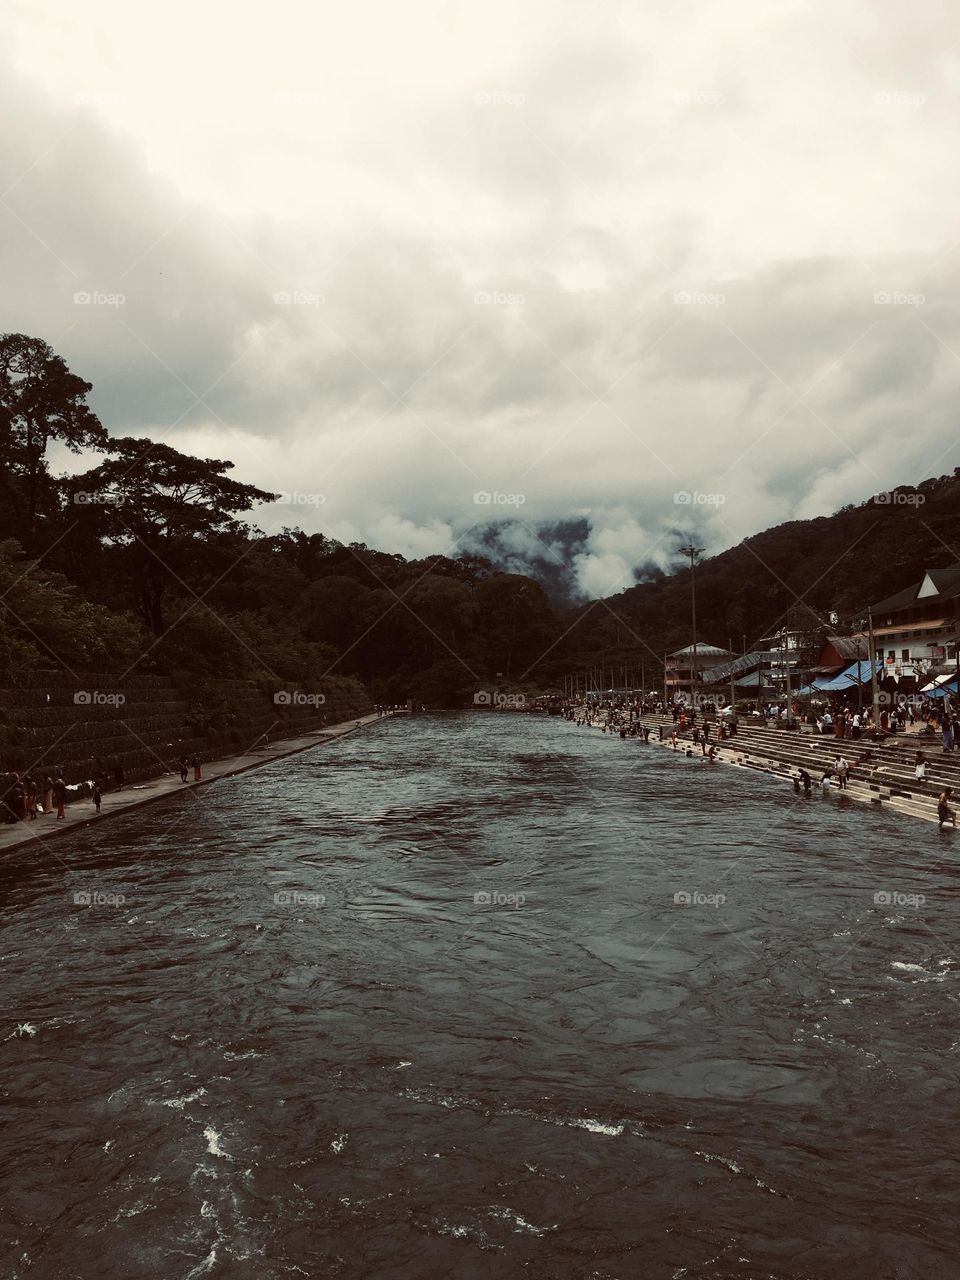 A river flowing calmly through population to deep forest with s cloudy sky over it. 